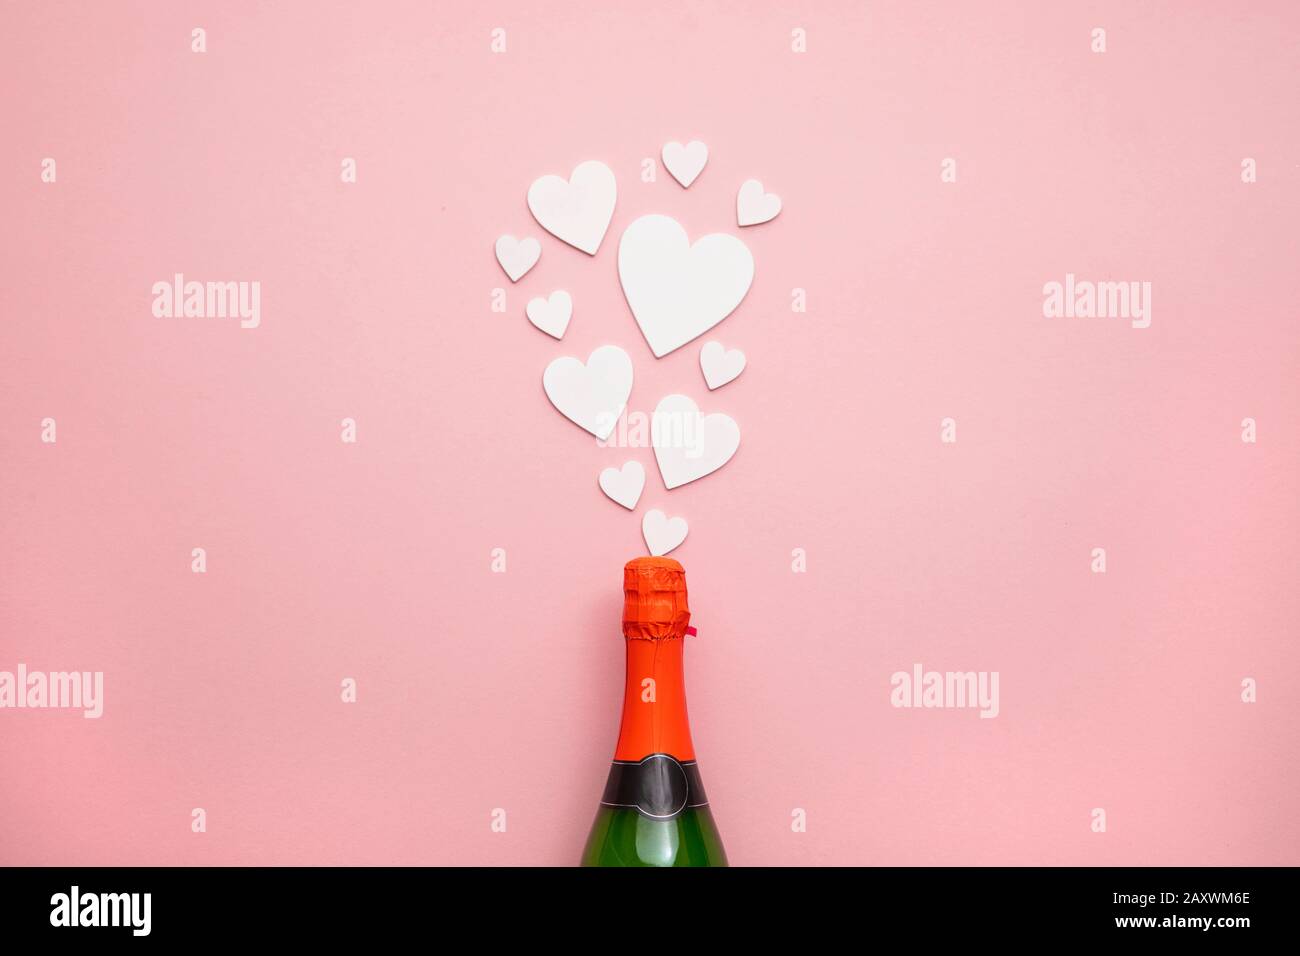 Romantic love hearts exploding from a bottle of champagne Stock Photo